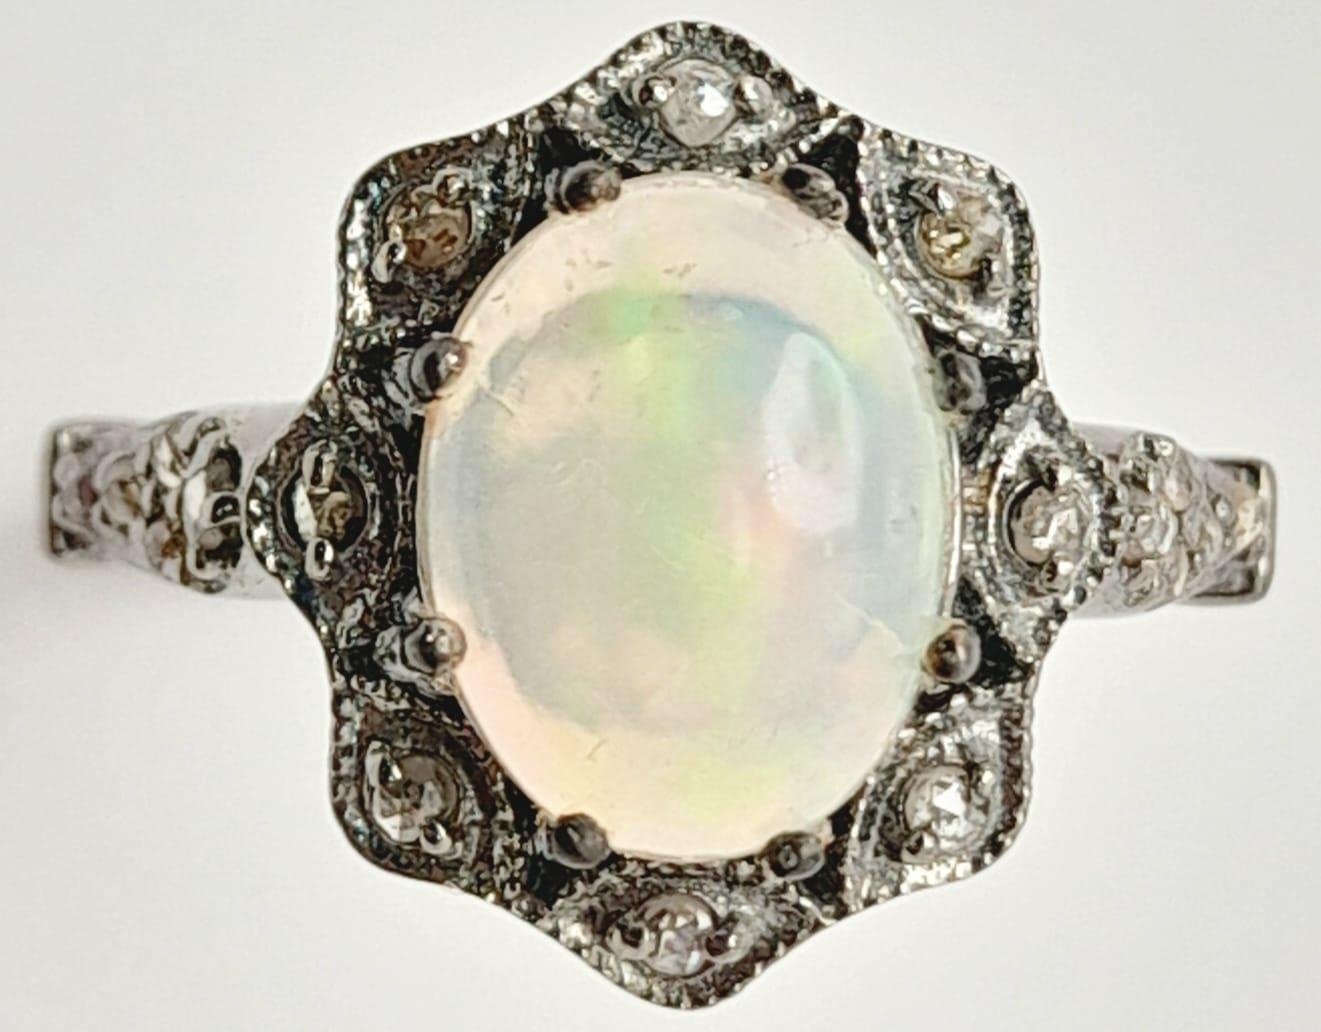 An Ethiopian Opal Ring with Rose Cut diamond Surround and Accents. Set in 925 Sterling silver. - Image 2 of 5